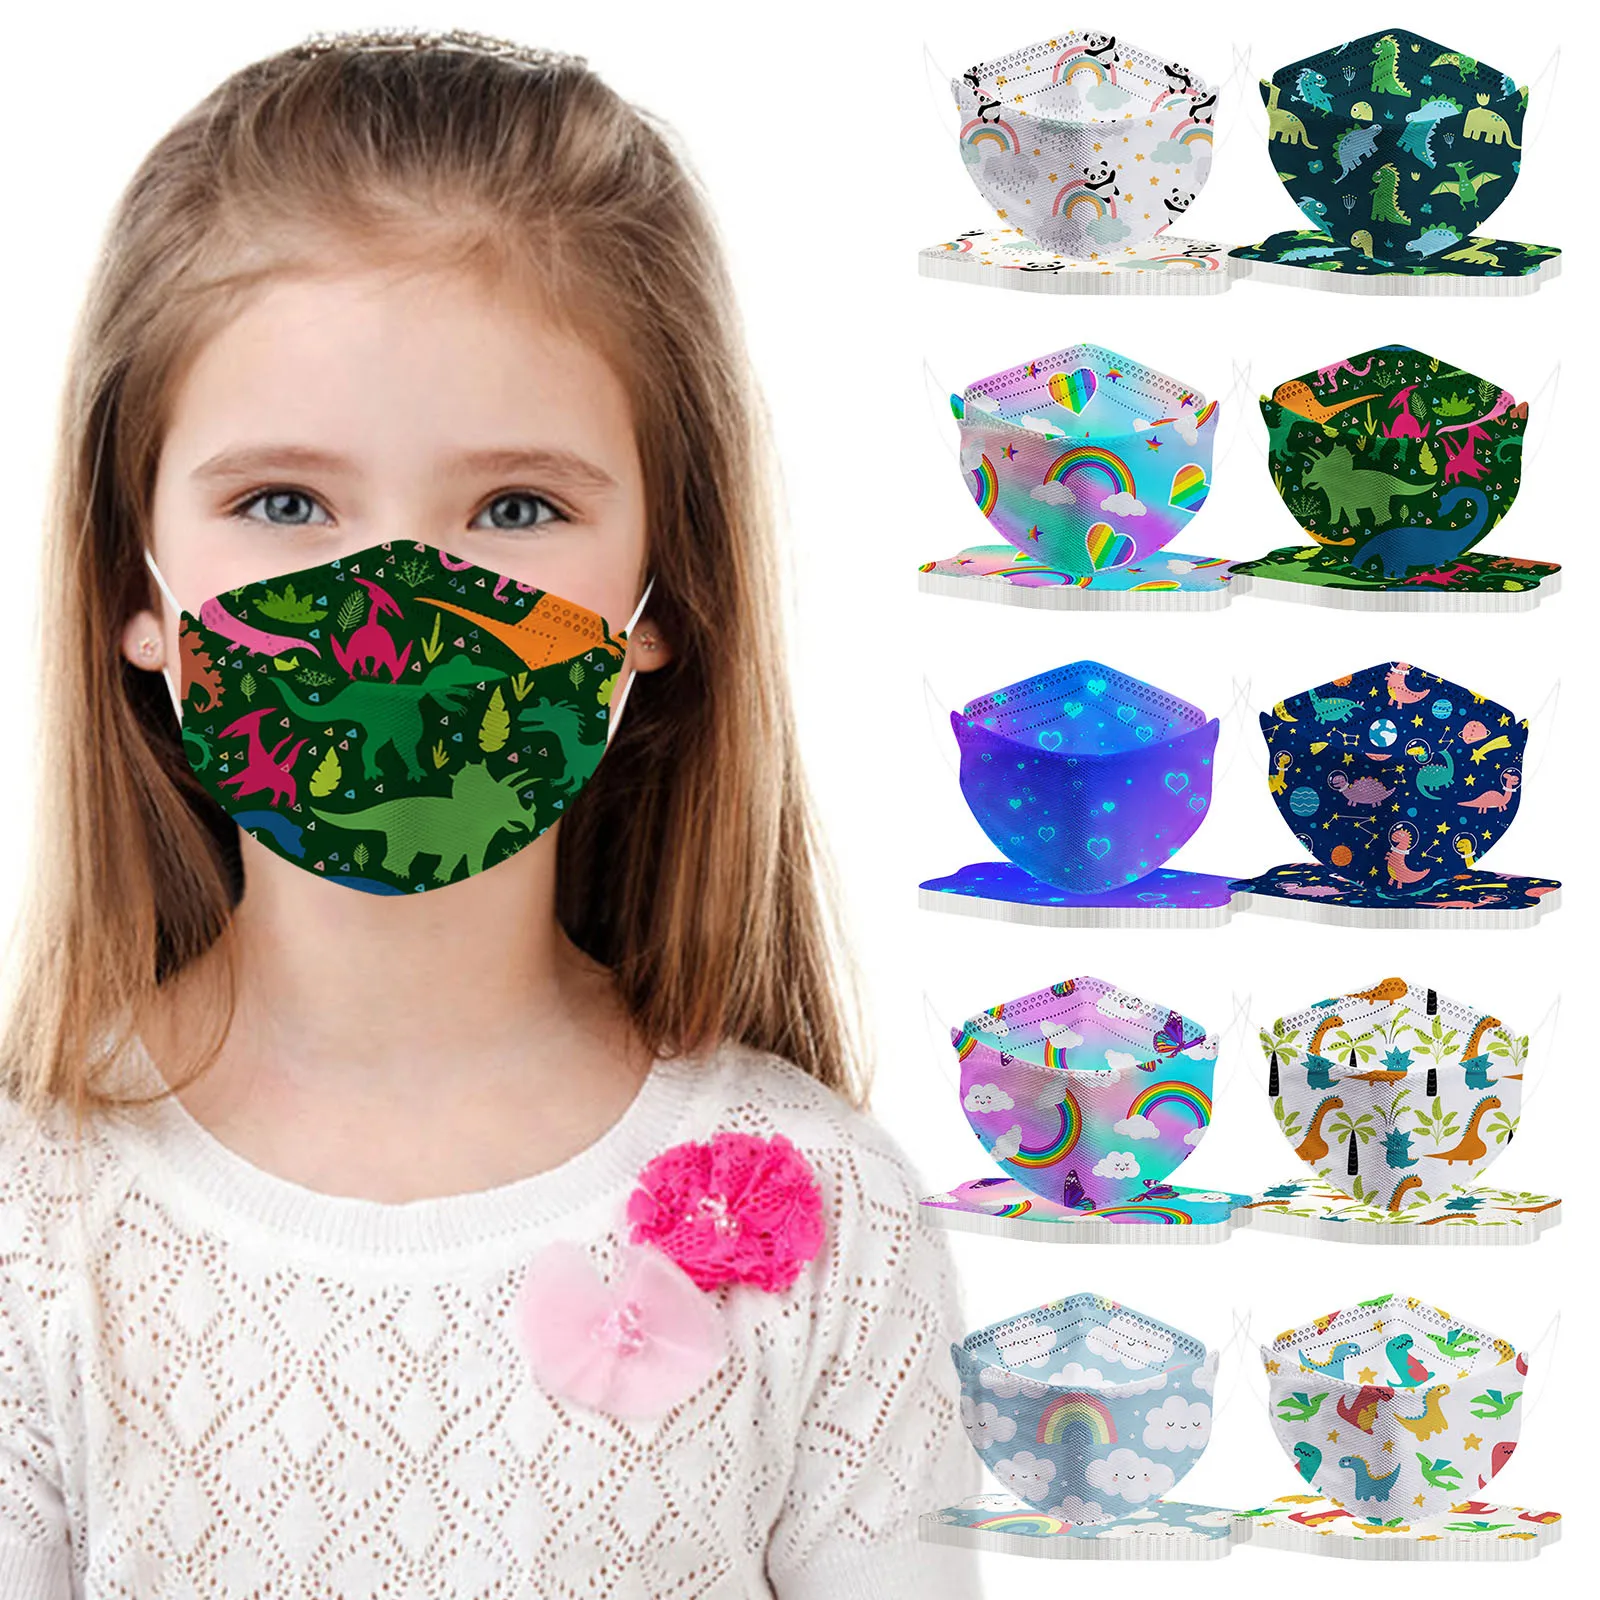 

10pc Kids Protection Masks Dinosaur Cartoon Patterned 4ply Cute Child Girls Breathable Fabric Pm2.5 Mouth Mask Xmas Decoration